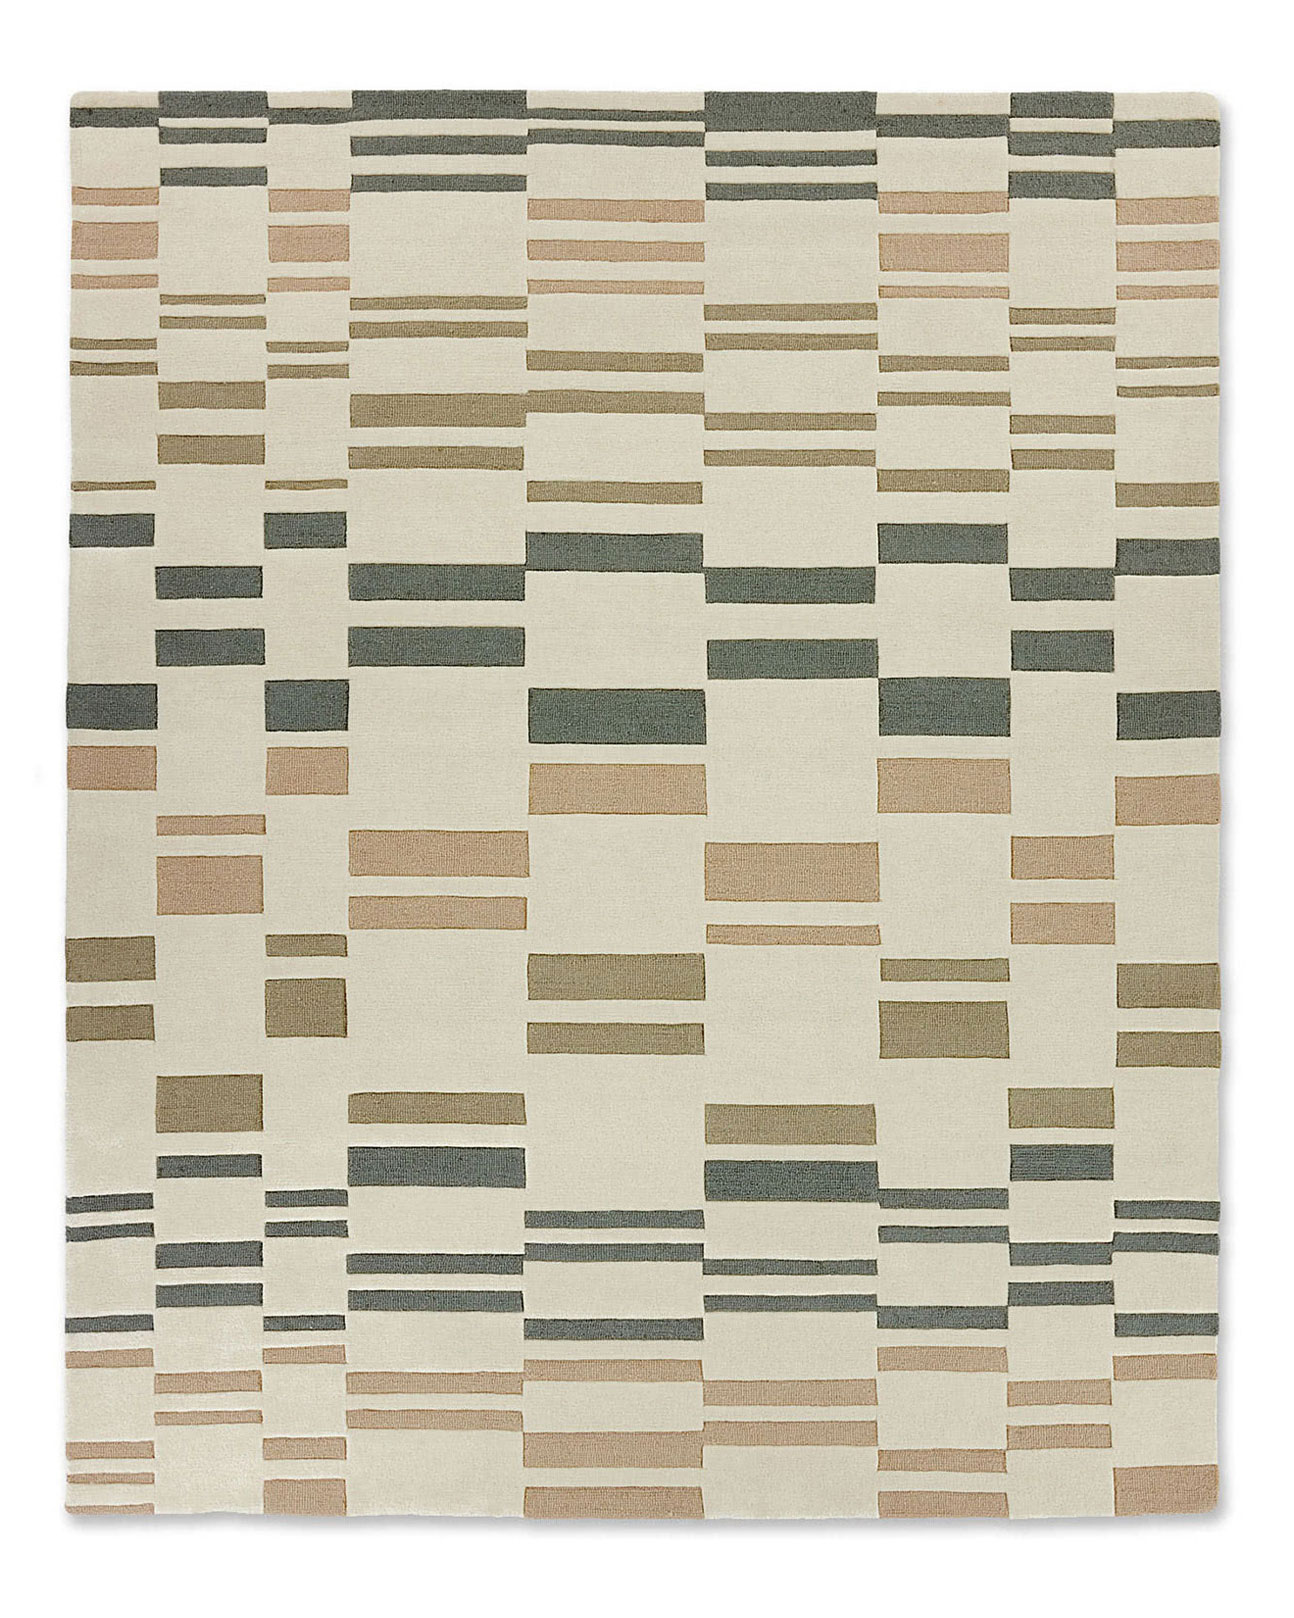 Luxury plush new zealand wool area rug in neutral tones with a geometric pattern.